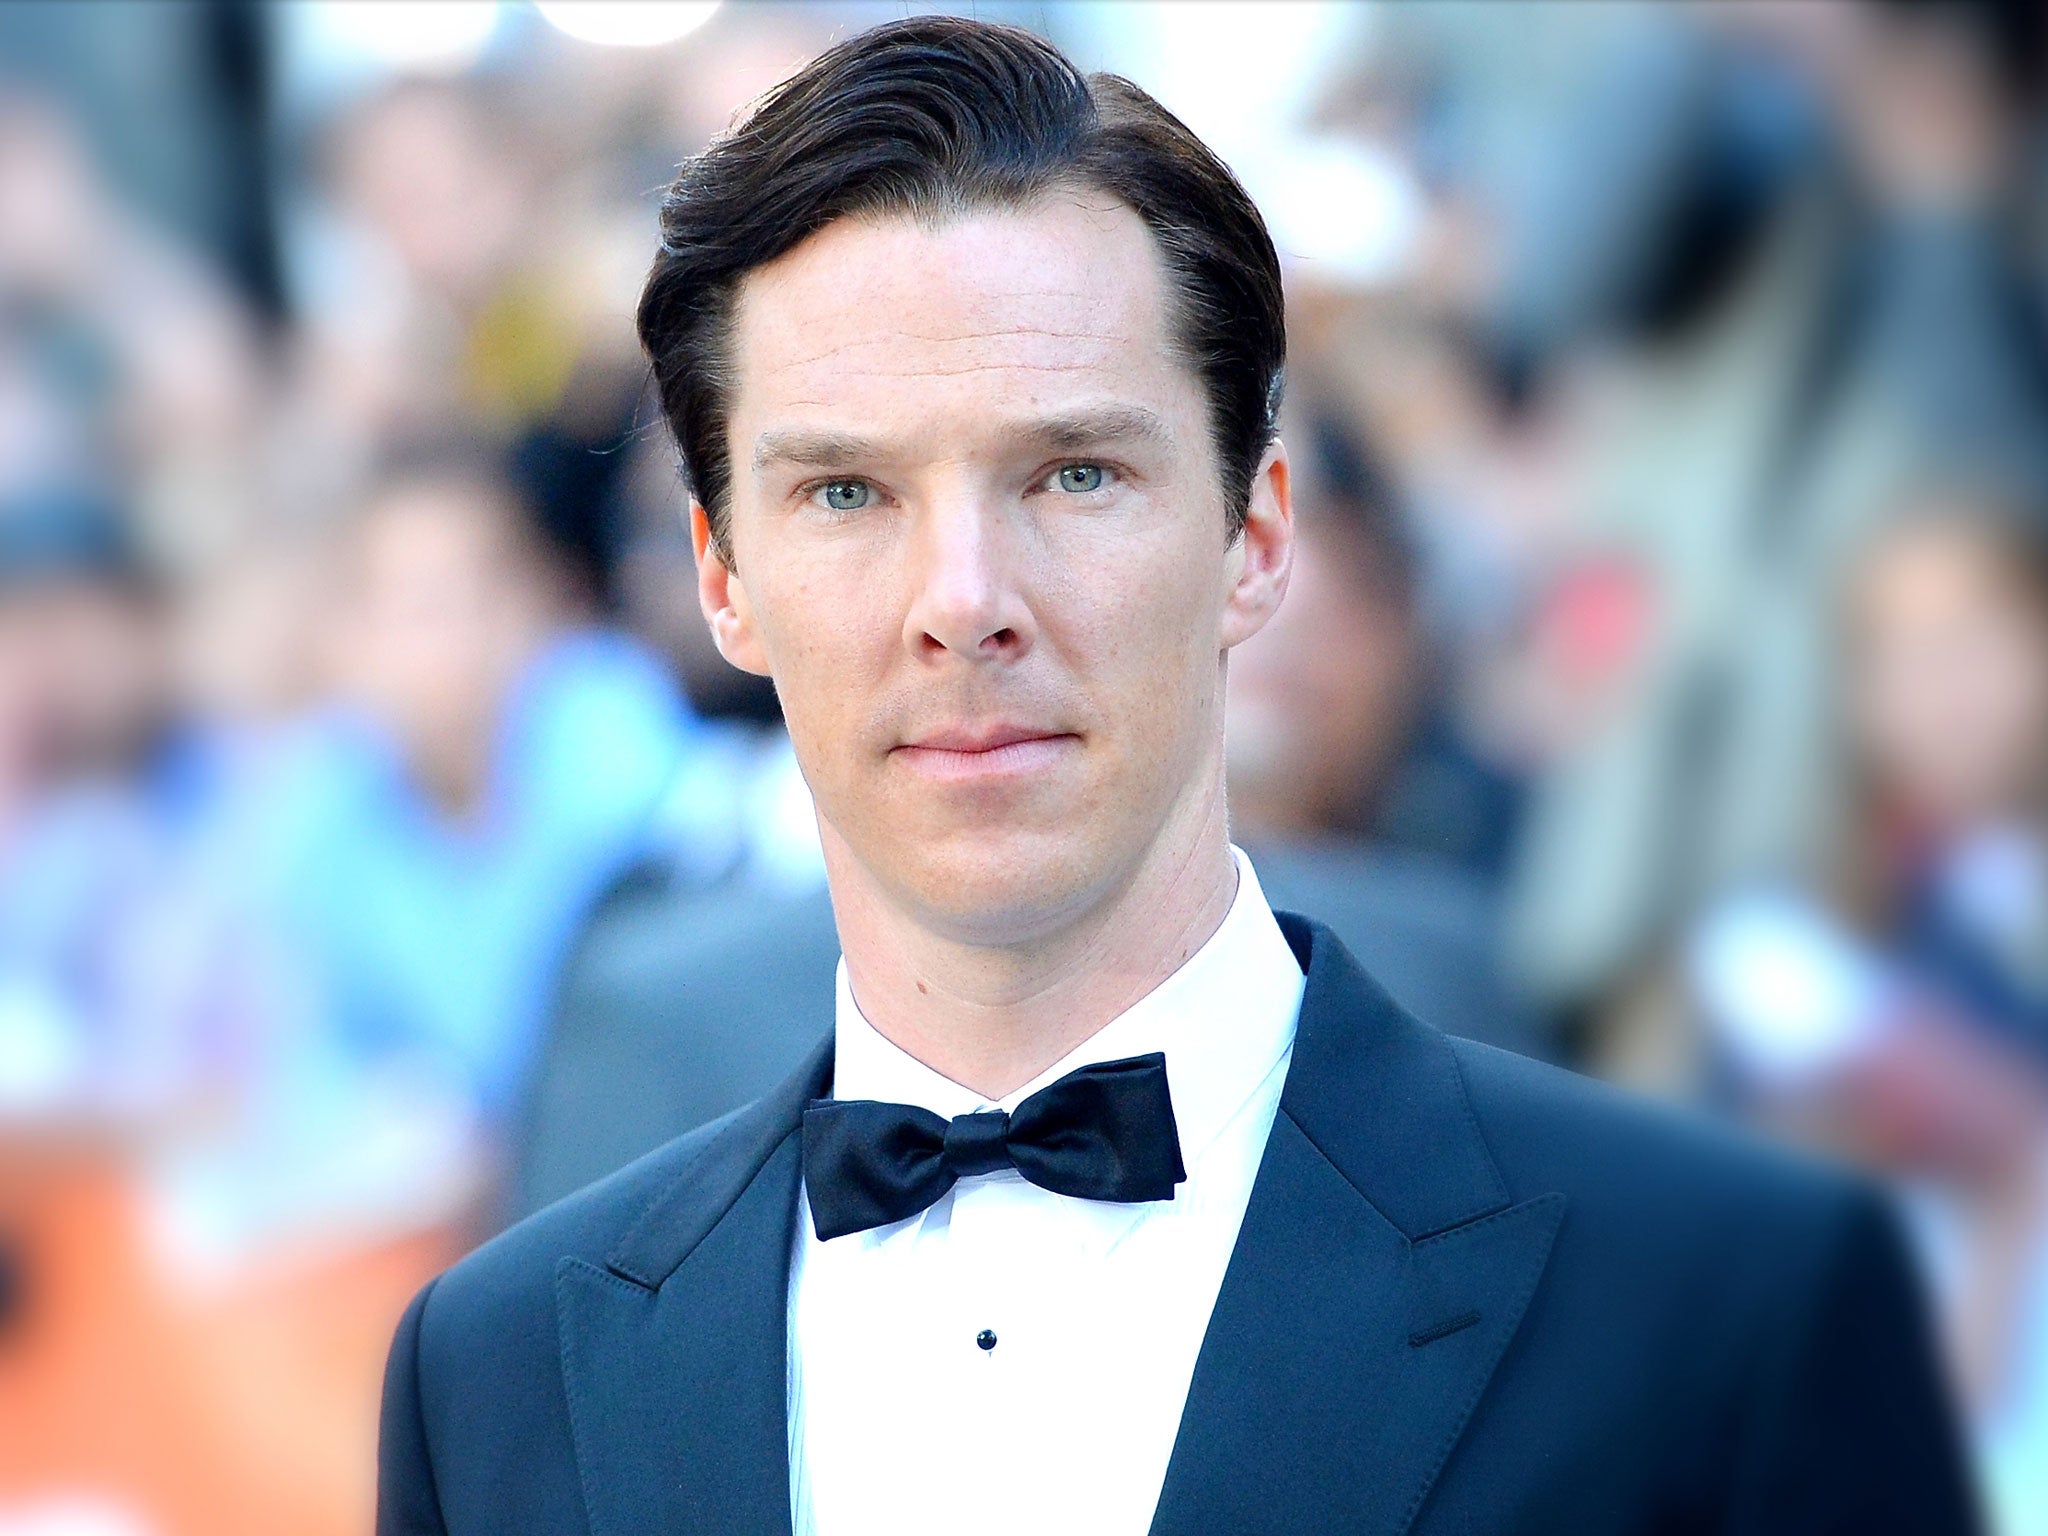 Sherlock's Benedict Cumberbatch is going nowhere, he says, so long as he is 'challenged' in the role